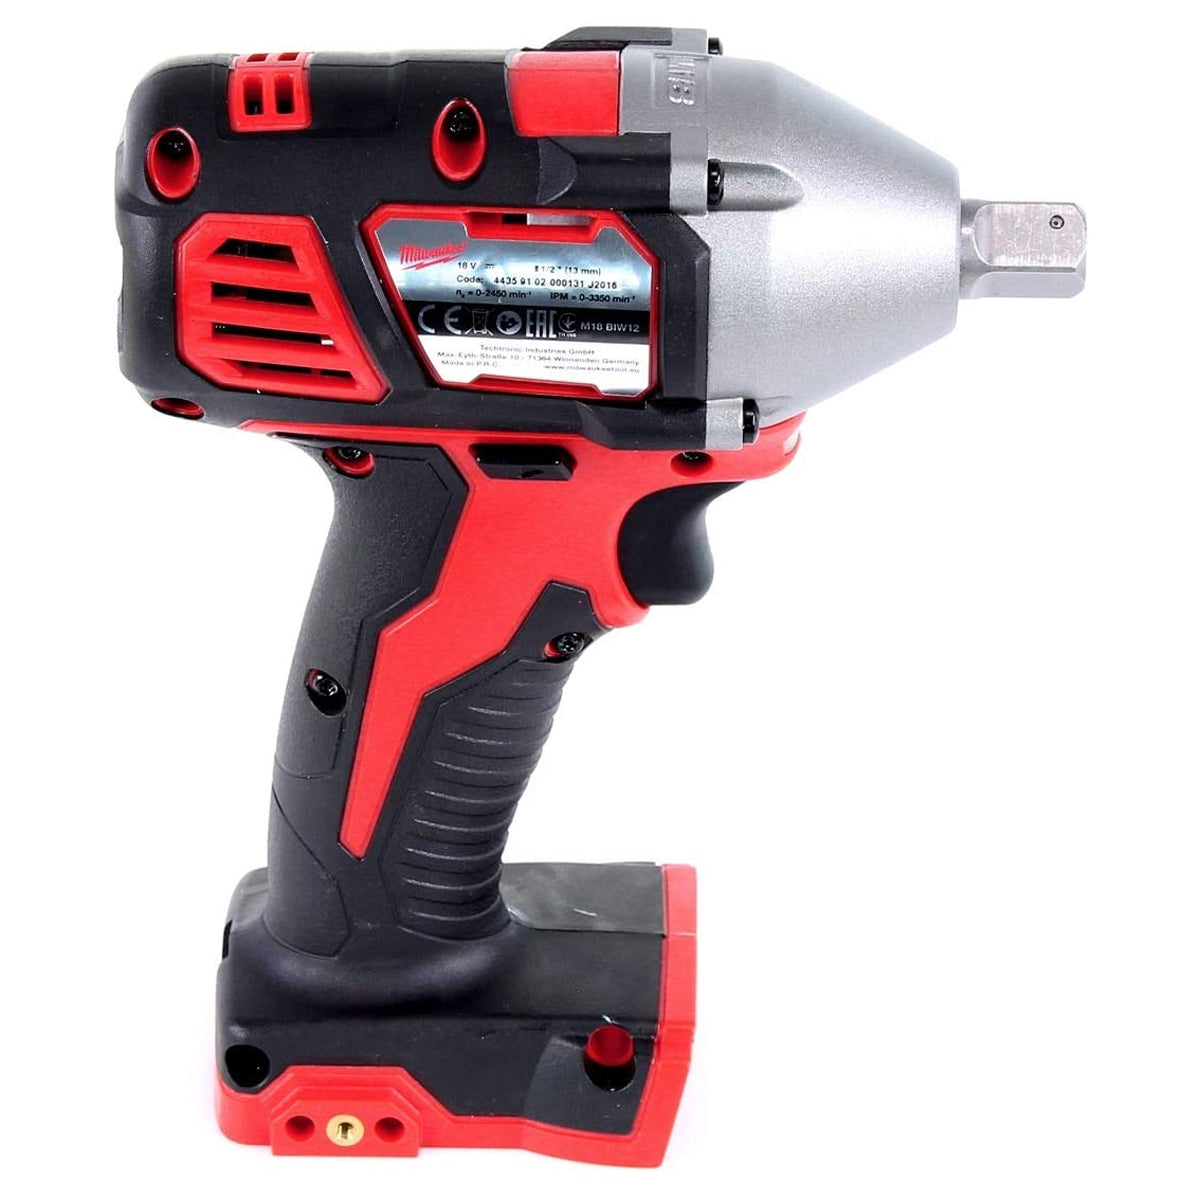 Milwaukee M18BIW12-0 18V Compact 1/2" Impact Wrench Body Only 4933443590